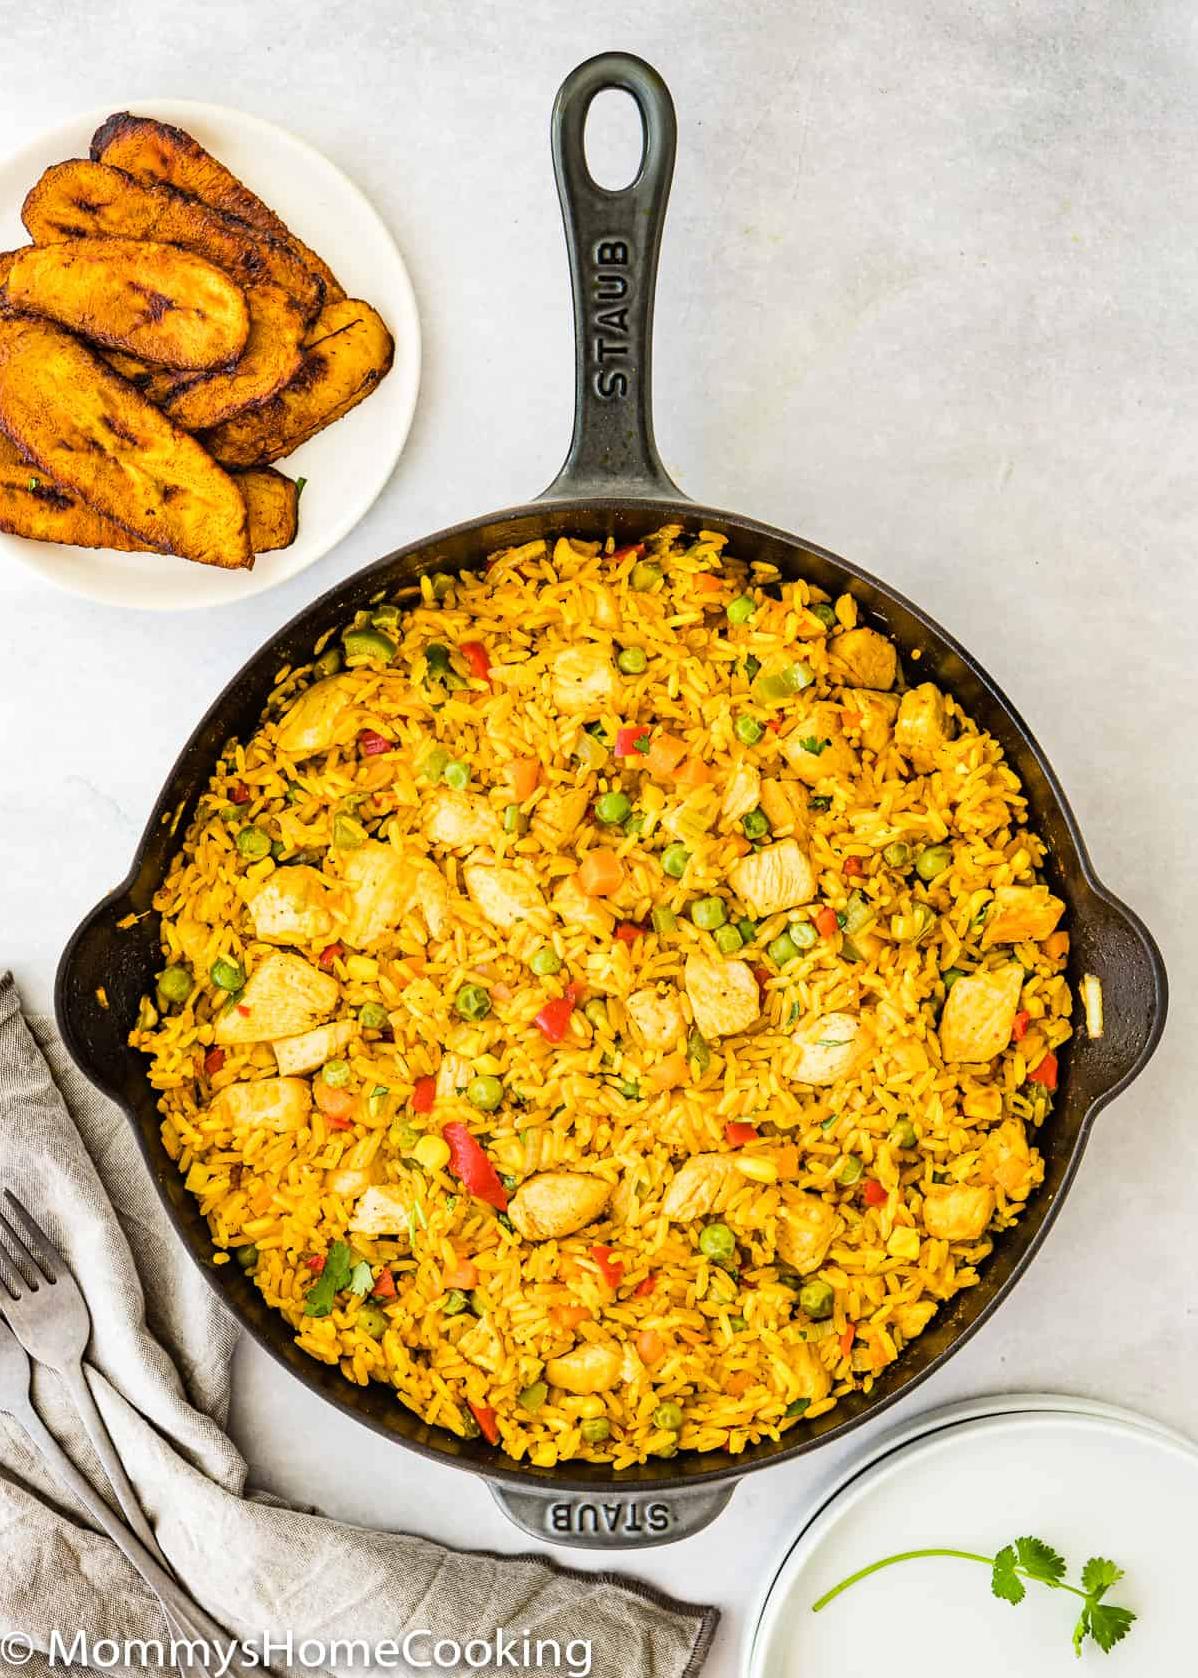  You don't have to travel to South America to enjoy a delicious bowl of arroz con pollo.